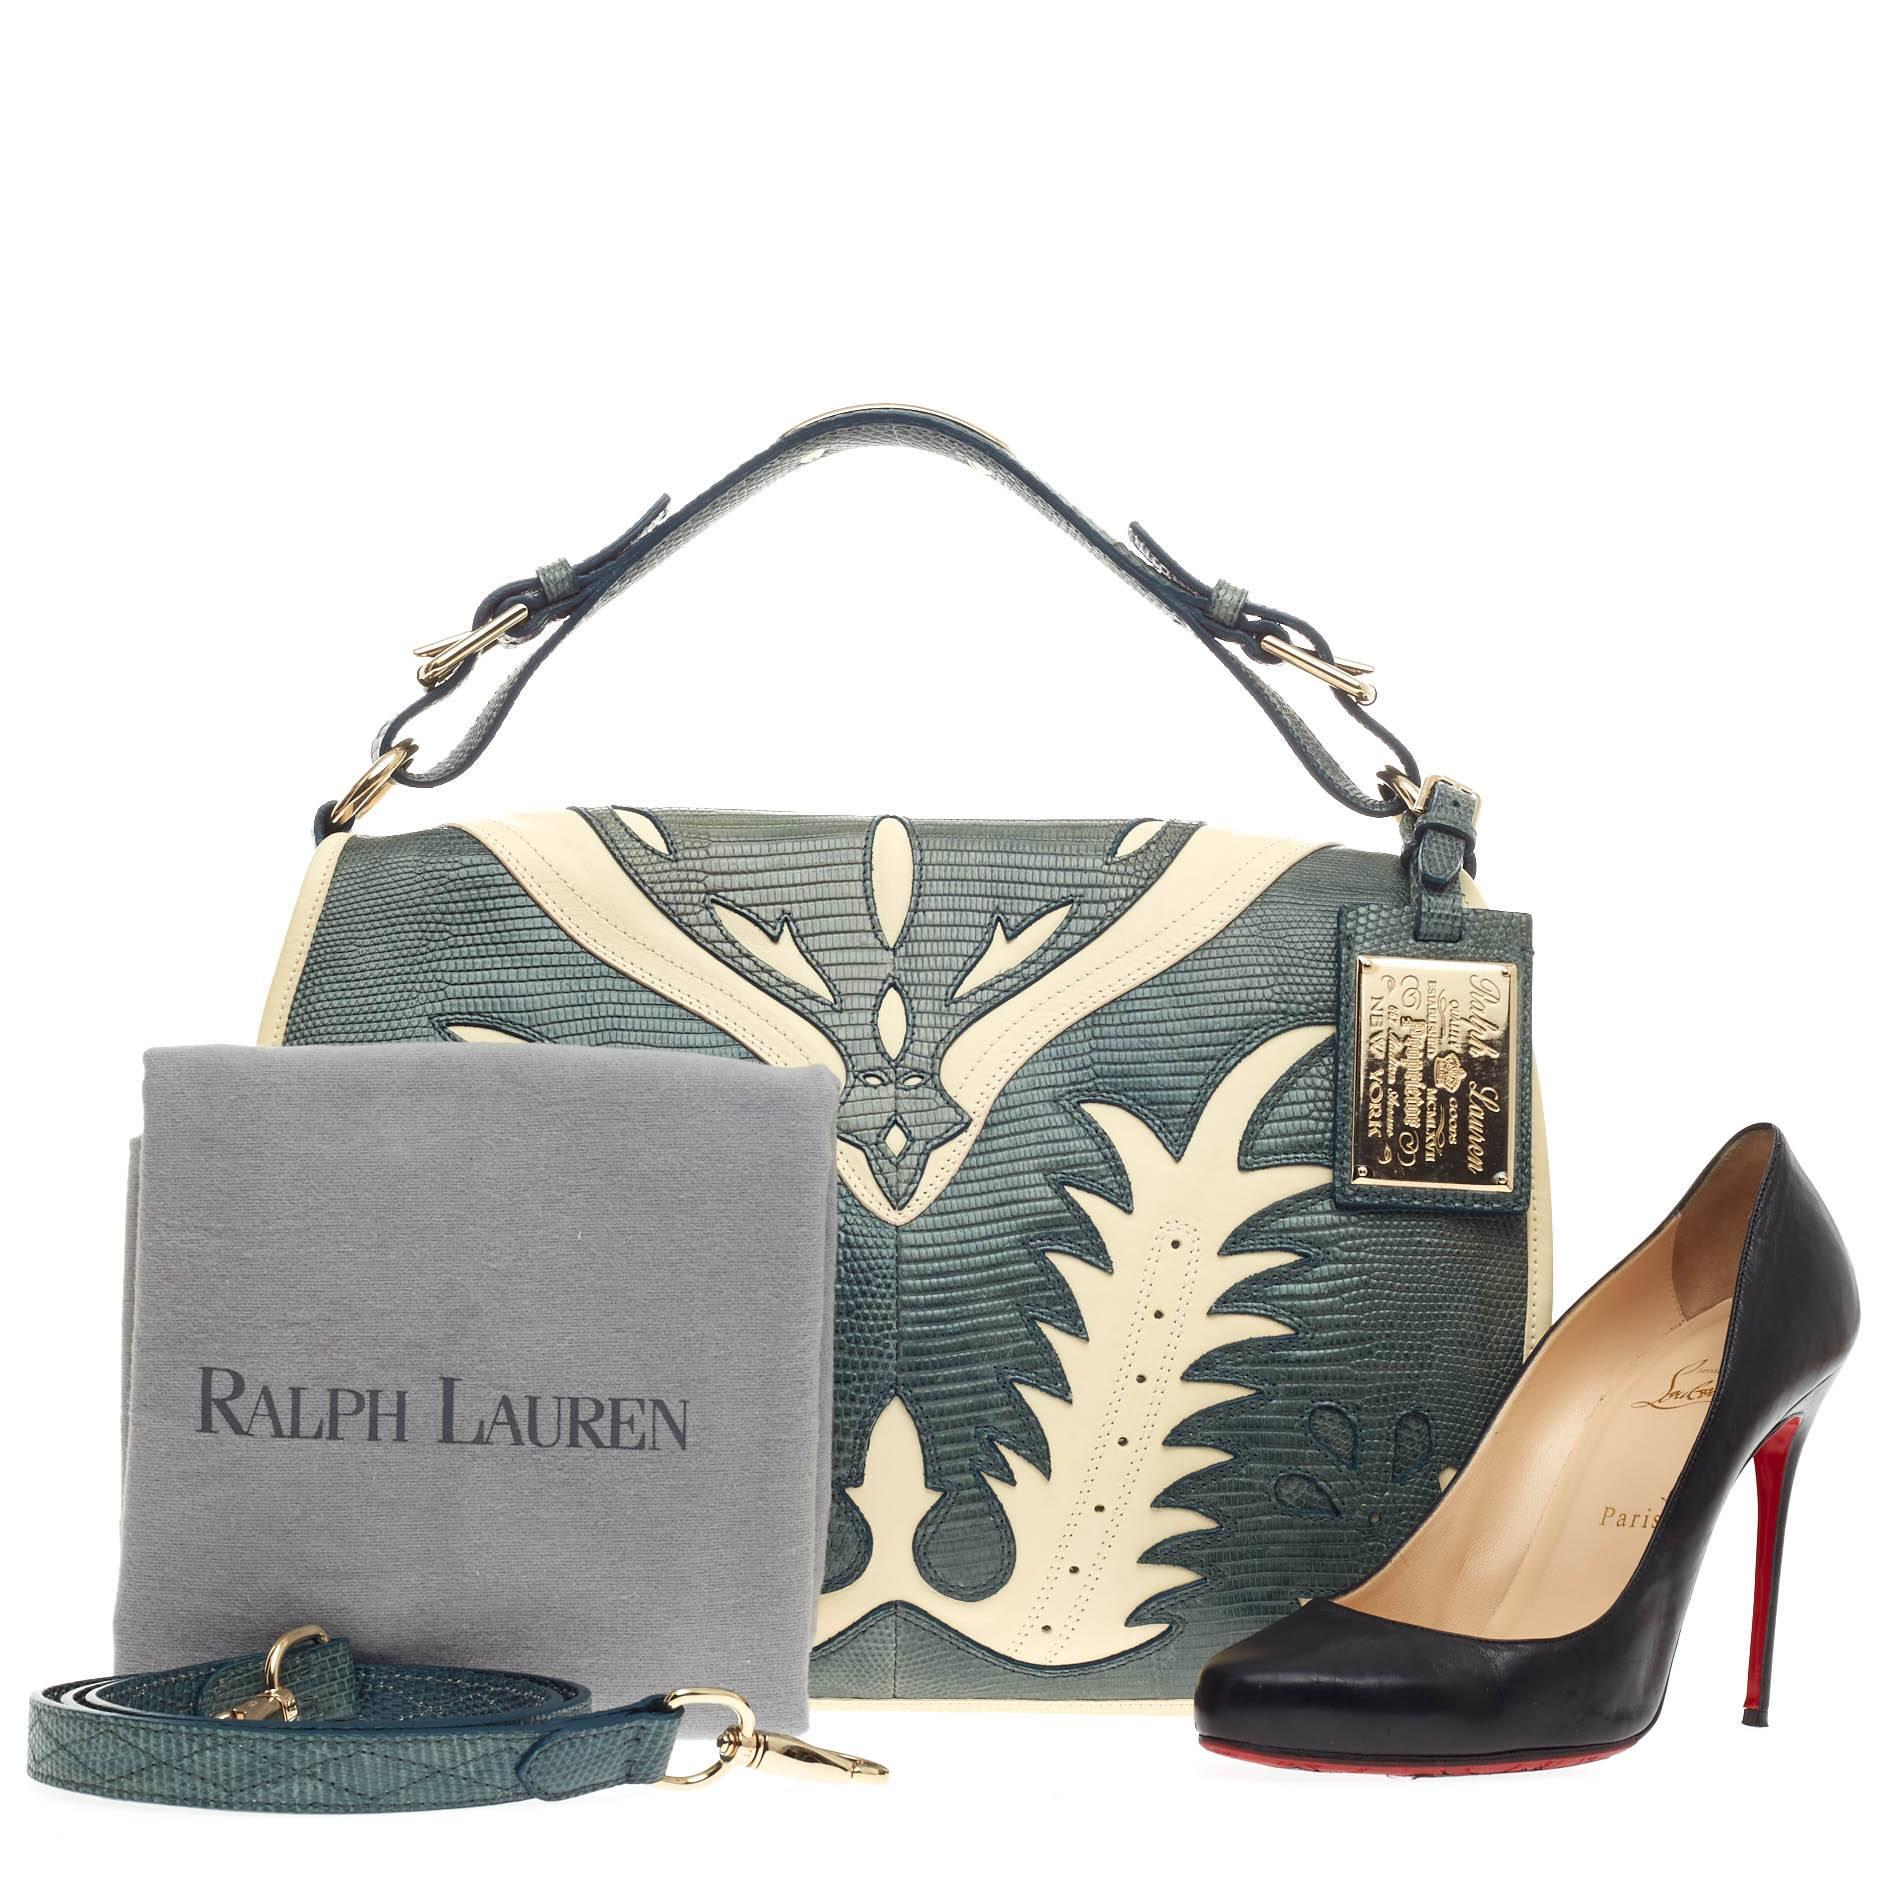 This authentic Ralph Lauren Cowboy Saddle Bag Lizard is a limited edition, rare piece mixing luxurious design with a western-inspired flair. Hand-crafted in genuine green lizard skin, this saddle-style hobo features a white cowboy inlay leather